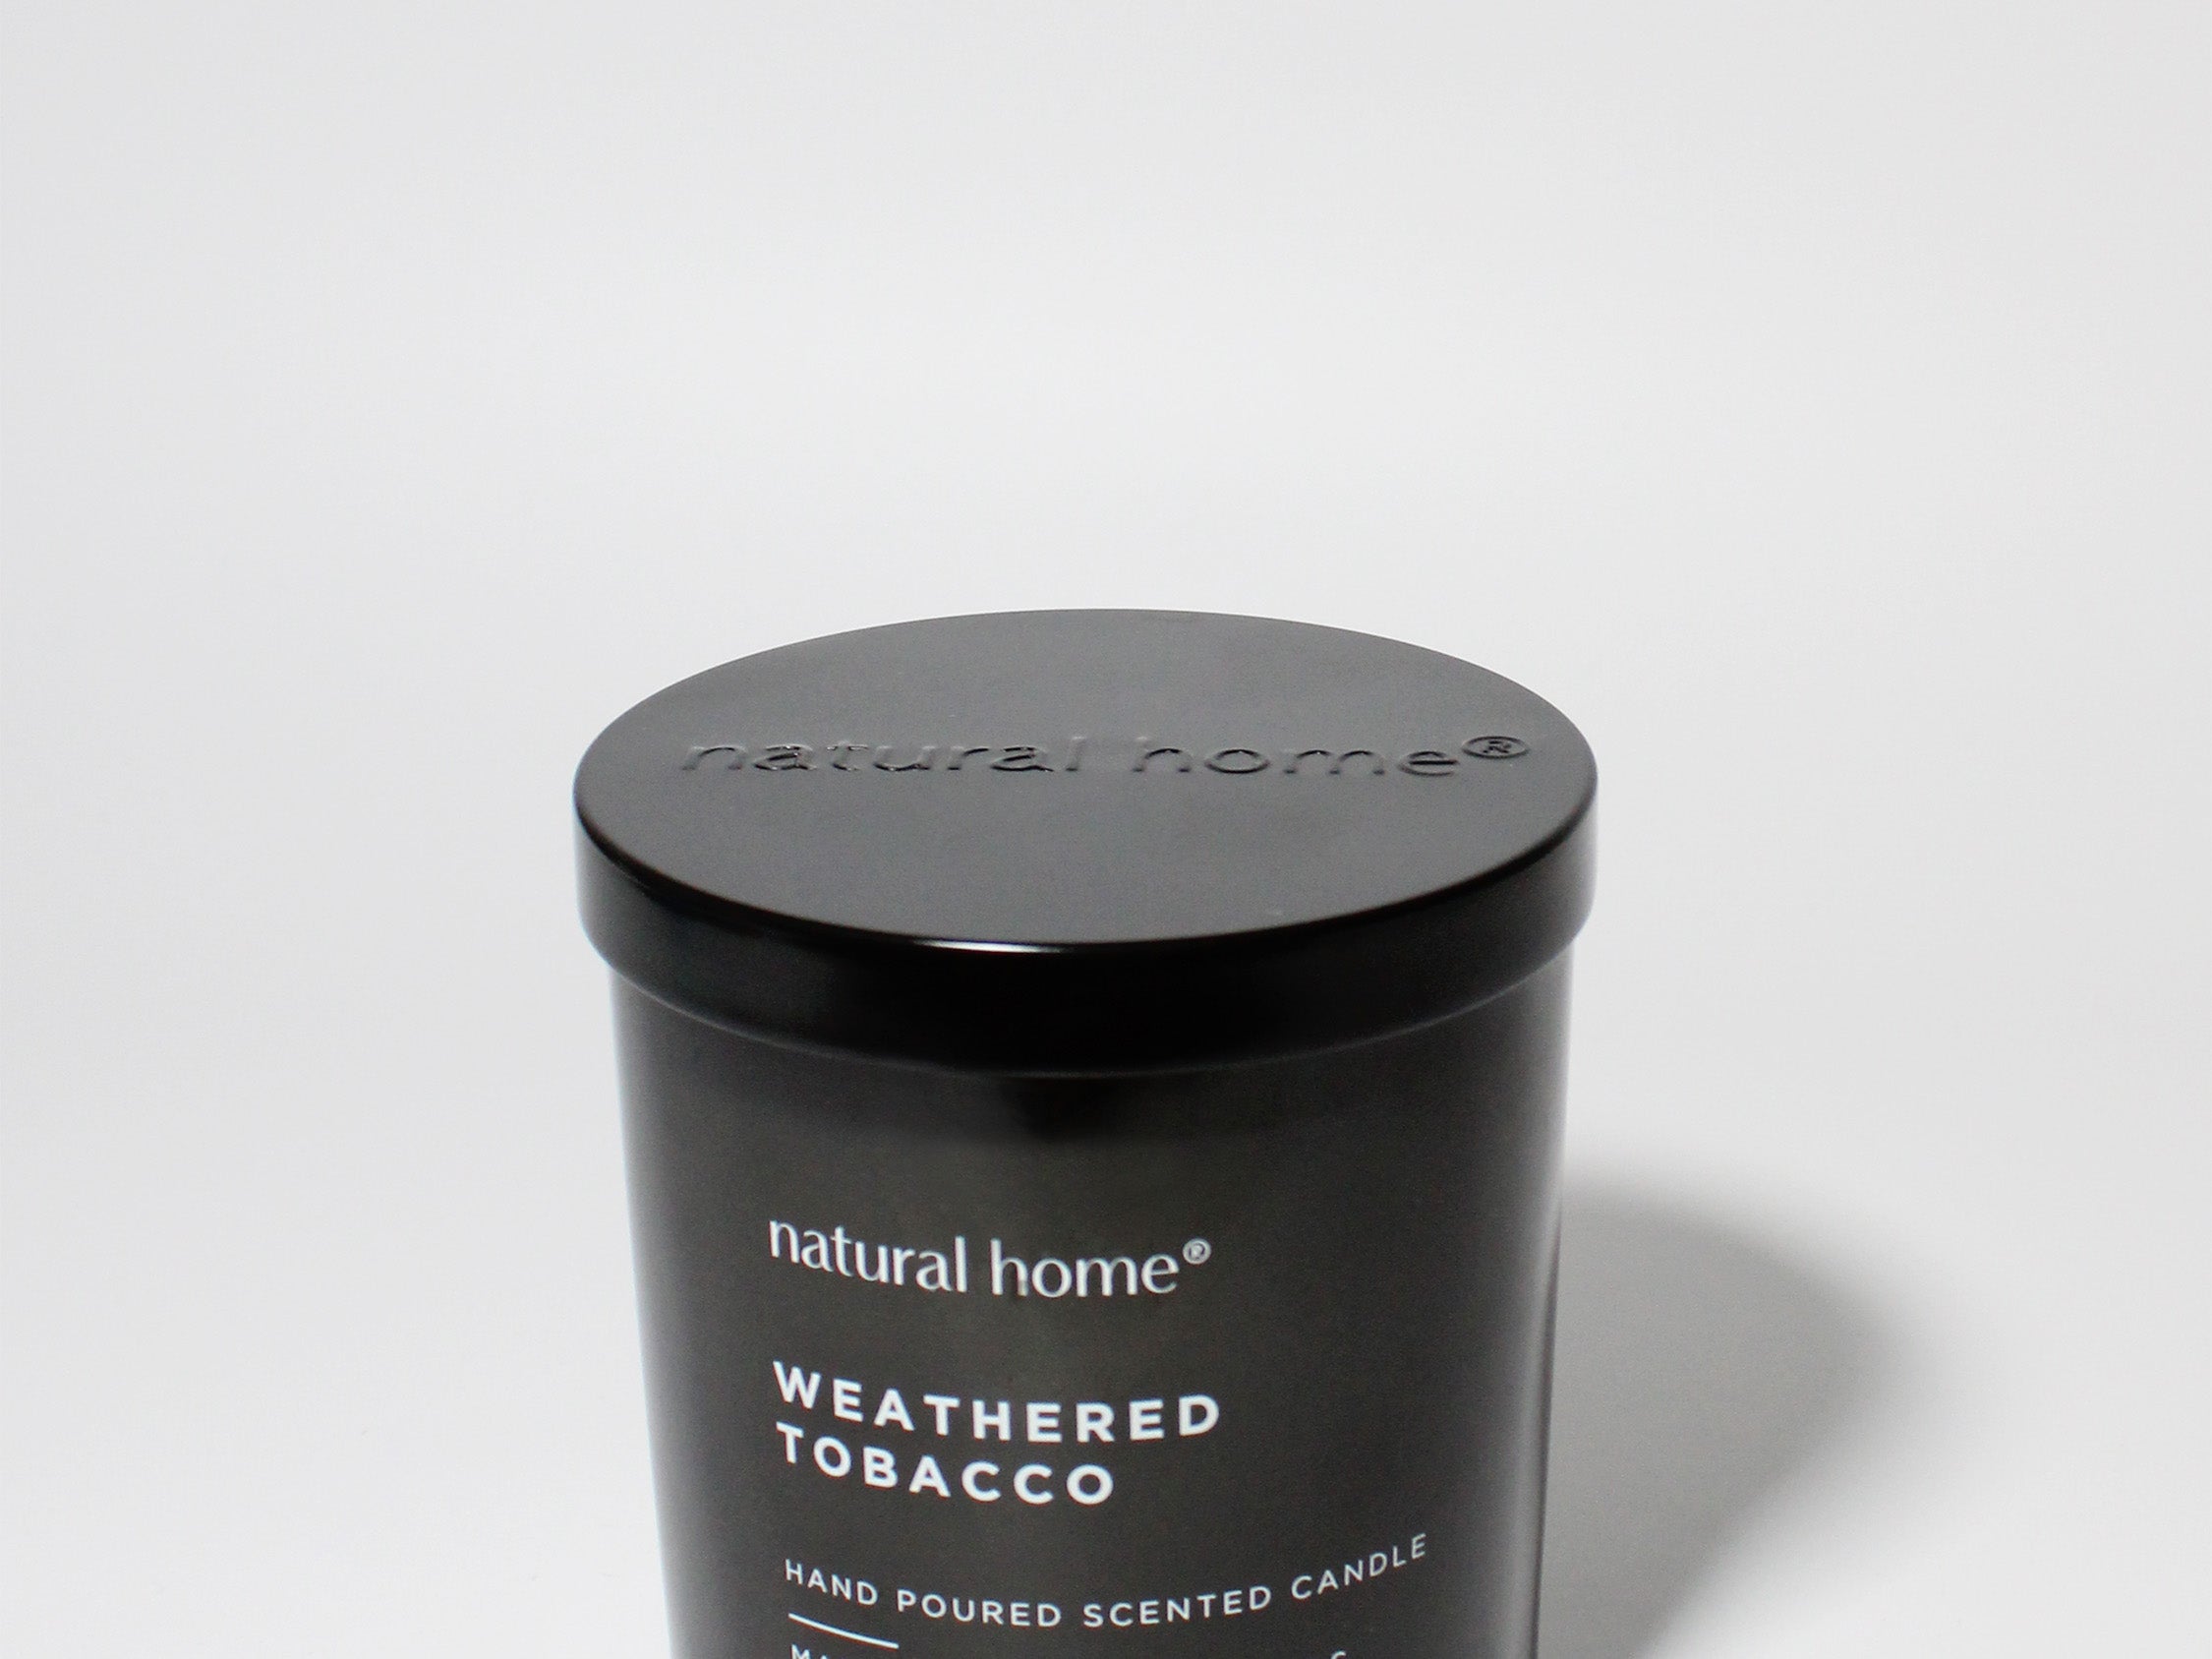 Weathered Tobacco Natural Home 11.5 oz scented candle Black vessel with metal lid